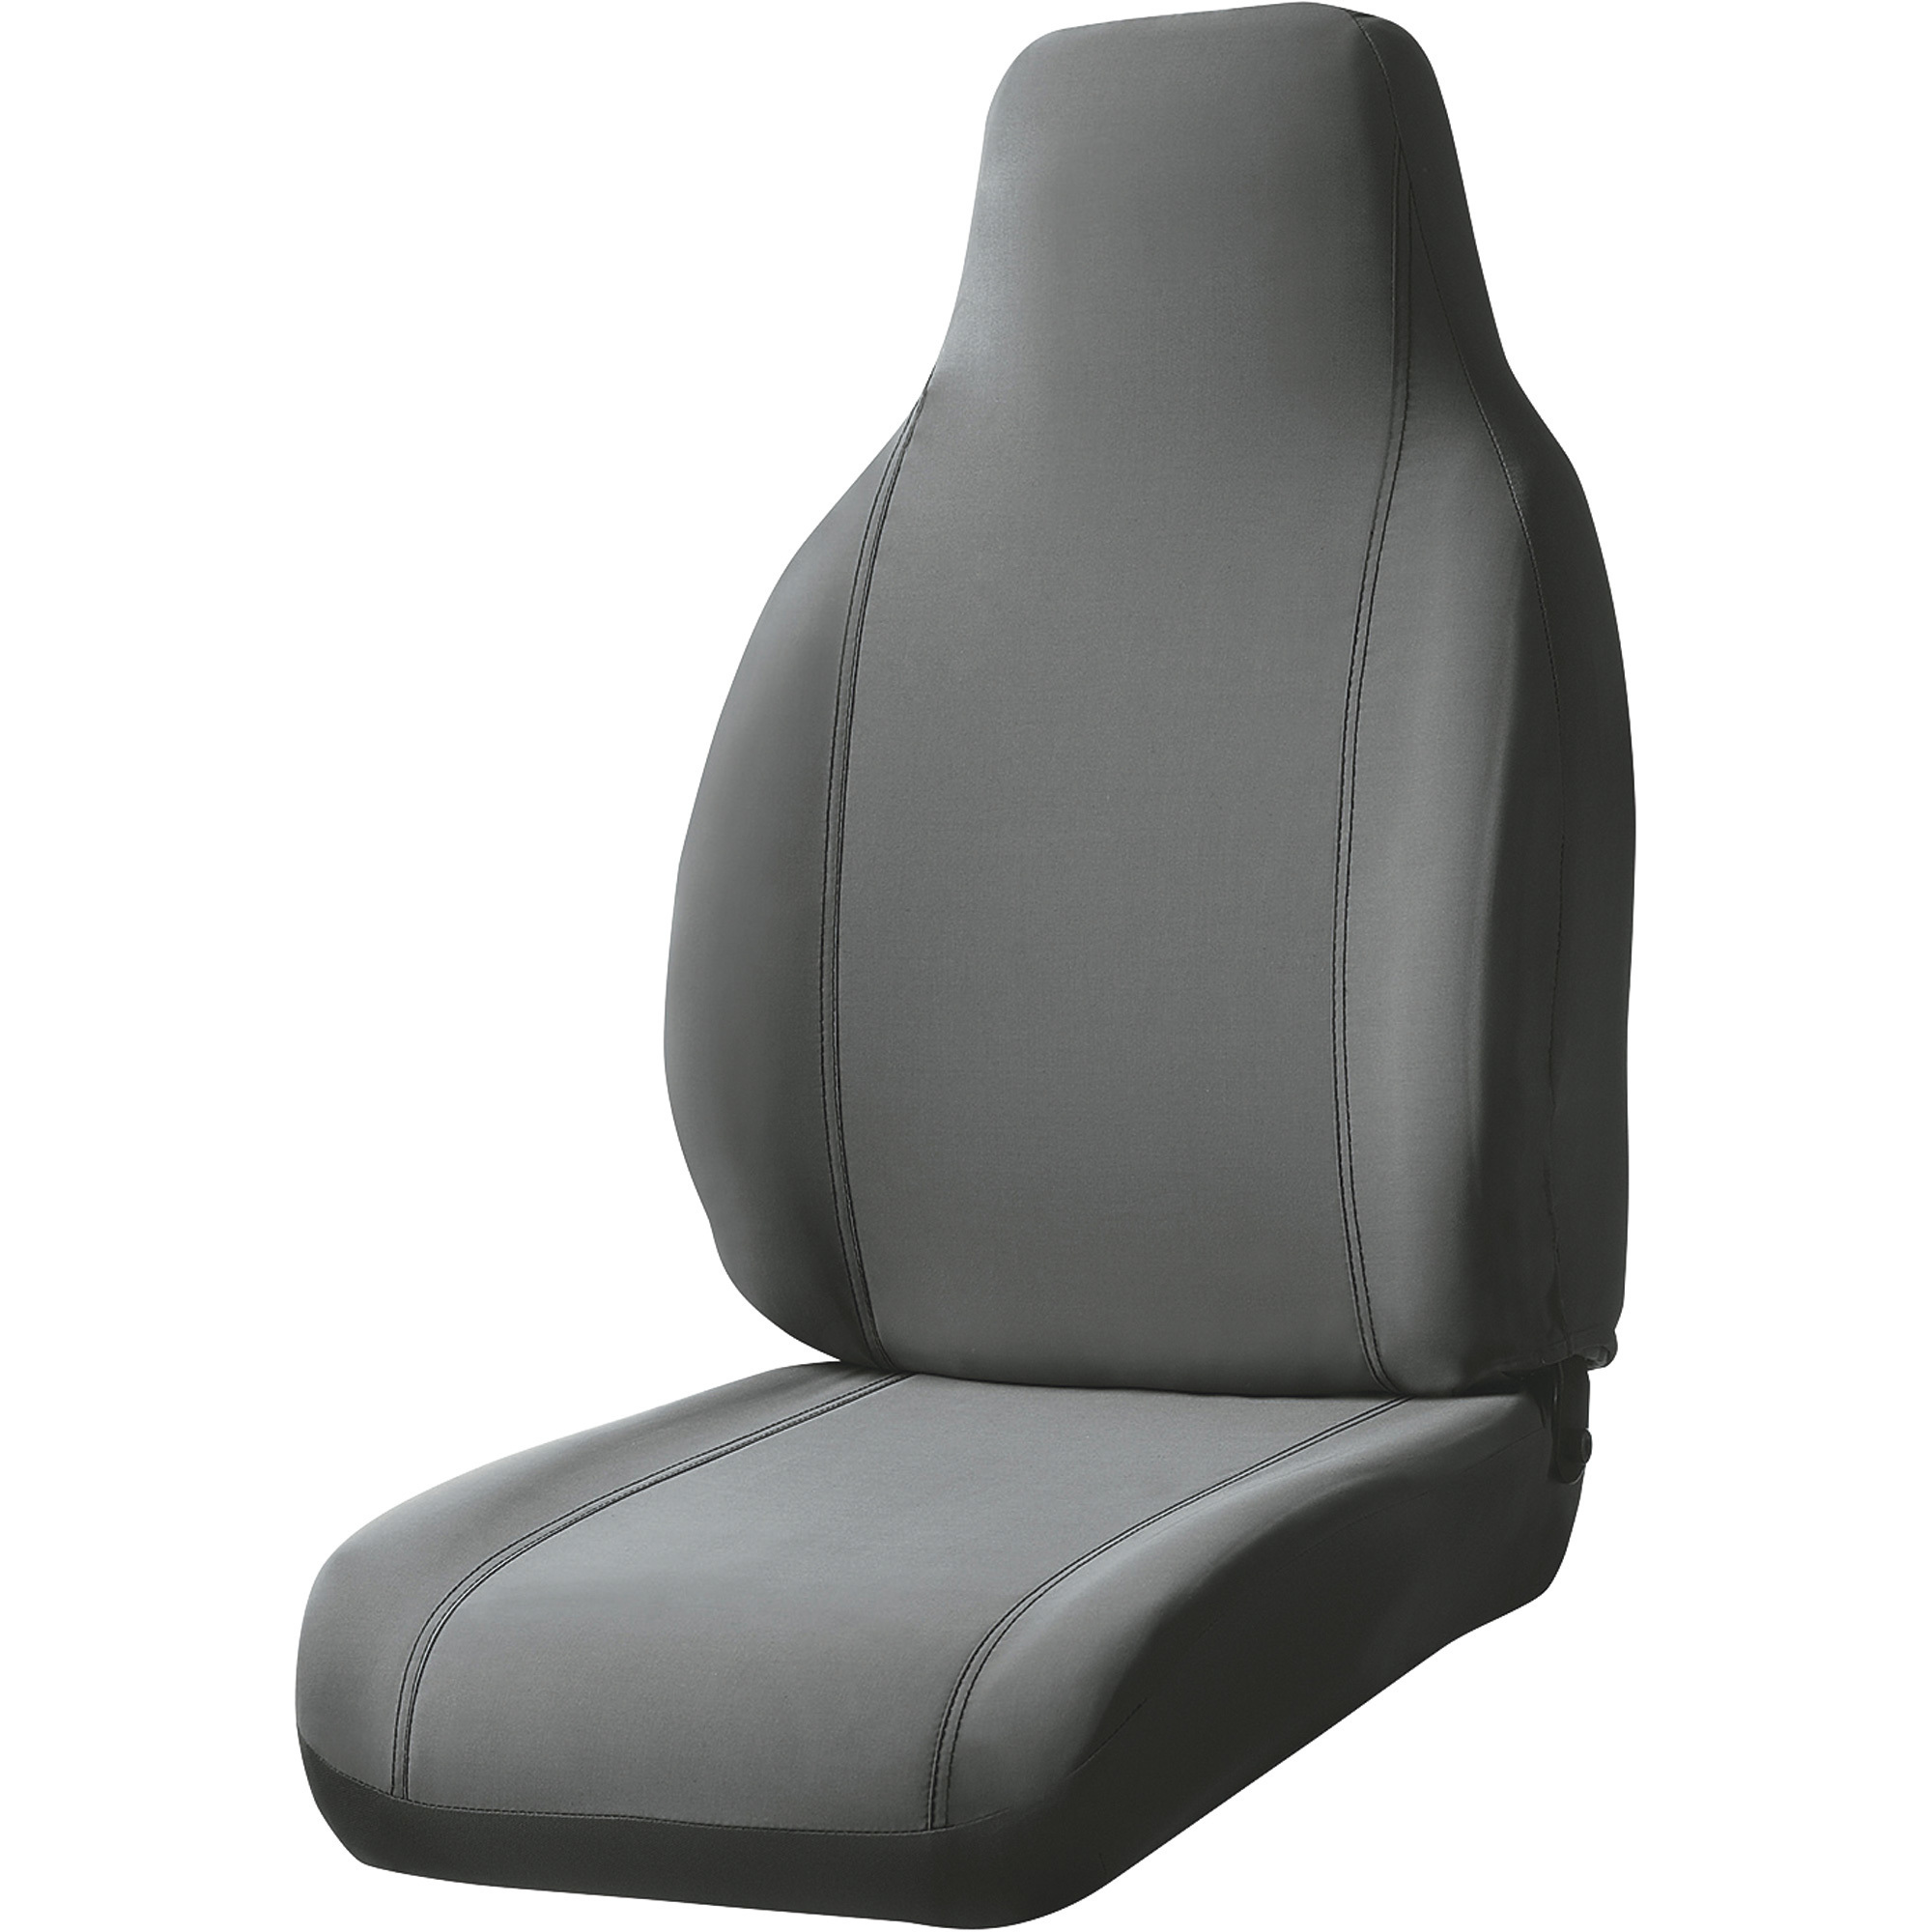 FiA Bostrom T-Series High-Back Bucket Seat and Armrest Covers â Gray, Single Bucket, Model SP8003 GRAY